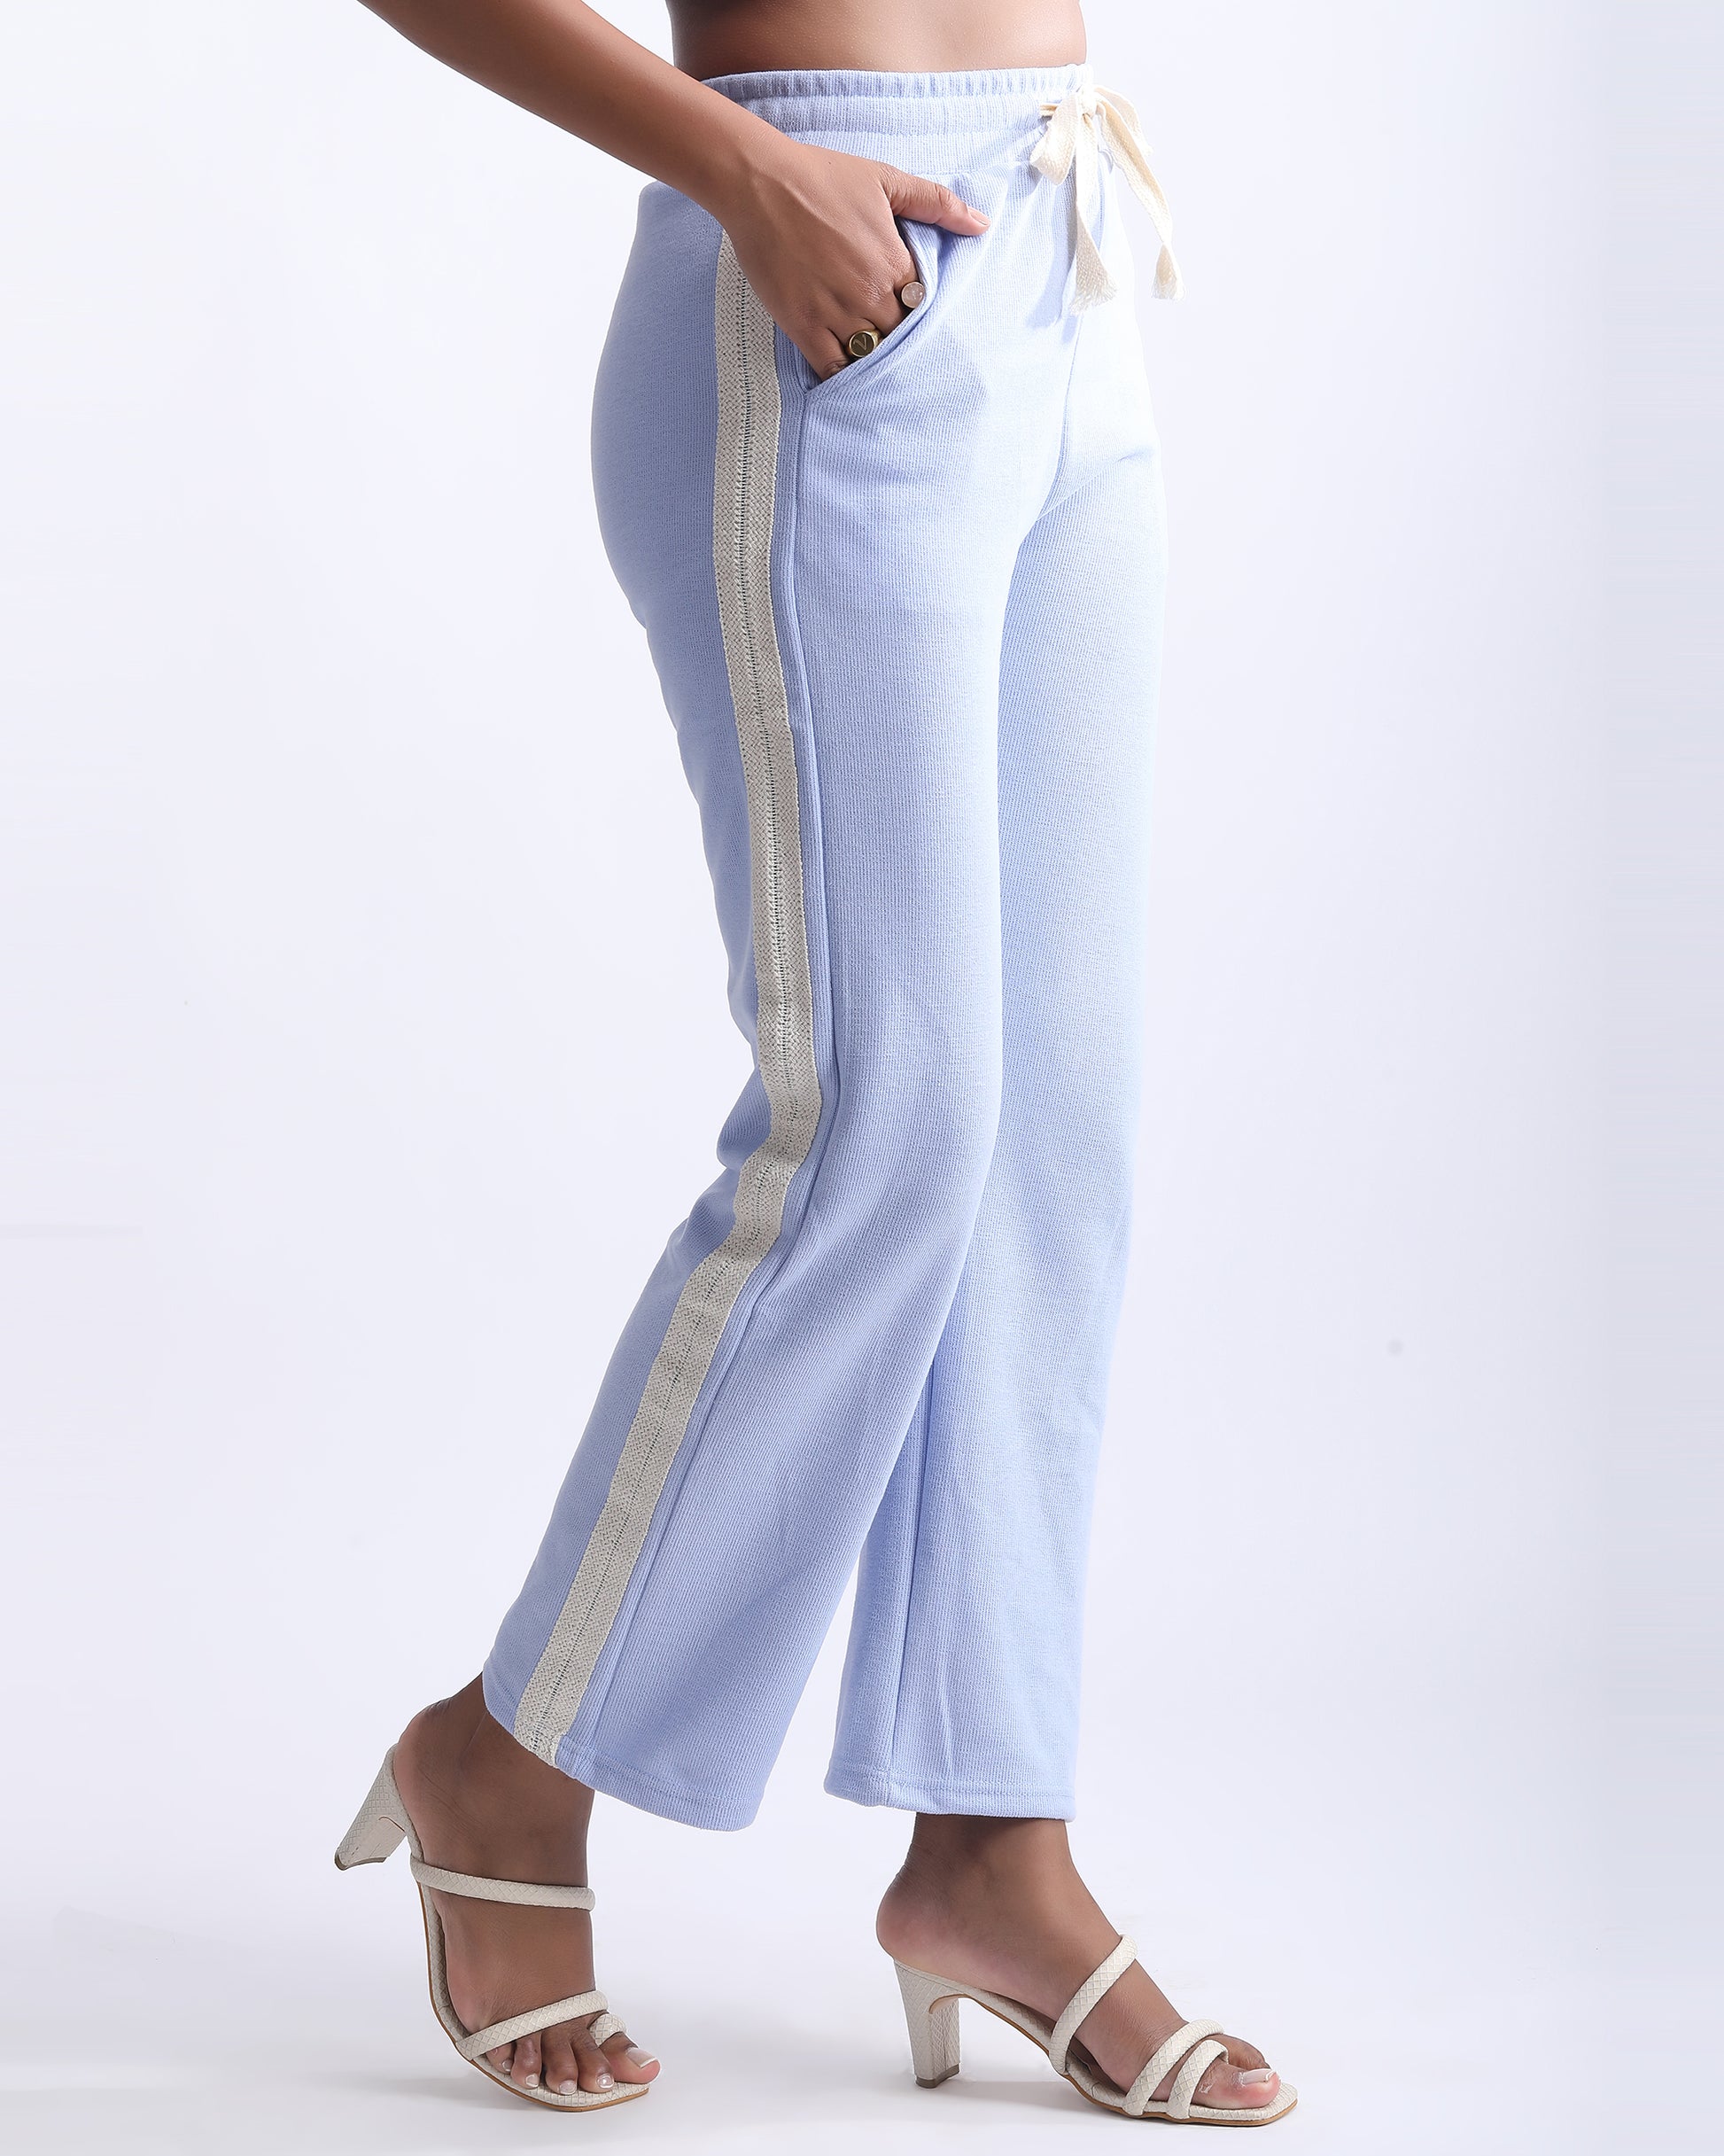 HIGH RISE LOUNGE TROUSER,blue, bottomwear, full length, high rise, knitted, lace, loungewear, relaxed fit, ribbed, trousers, wide leg,high-rise-lounge-trouser-blue,Color- Blue  
Fit- Straight Fit 
Length- Full 
Waist- High Rise 
Closure- Elasticated 
No. of Pockets- 2 
Fabric- Ribbed  
Print/ Pattern- Solid 
Details/Design Elements- Laced